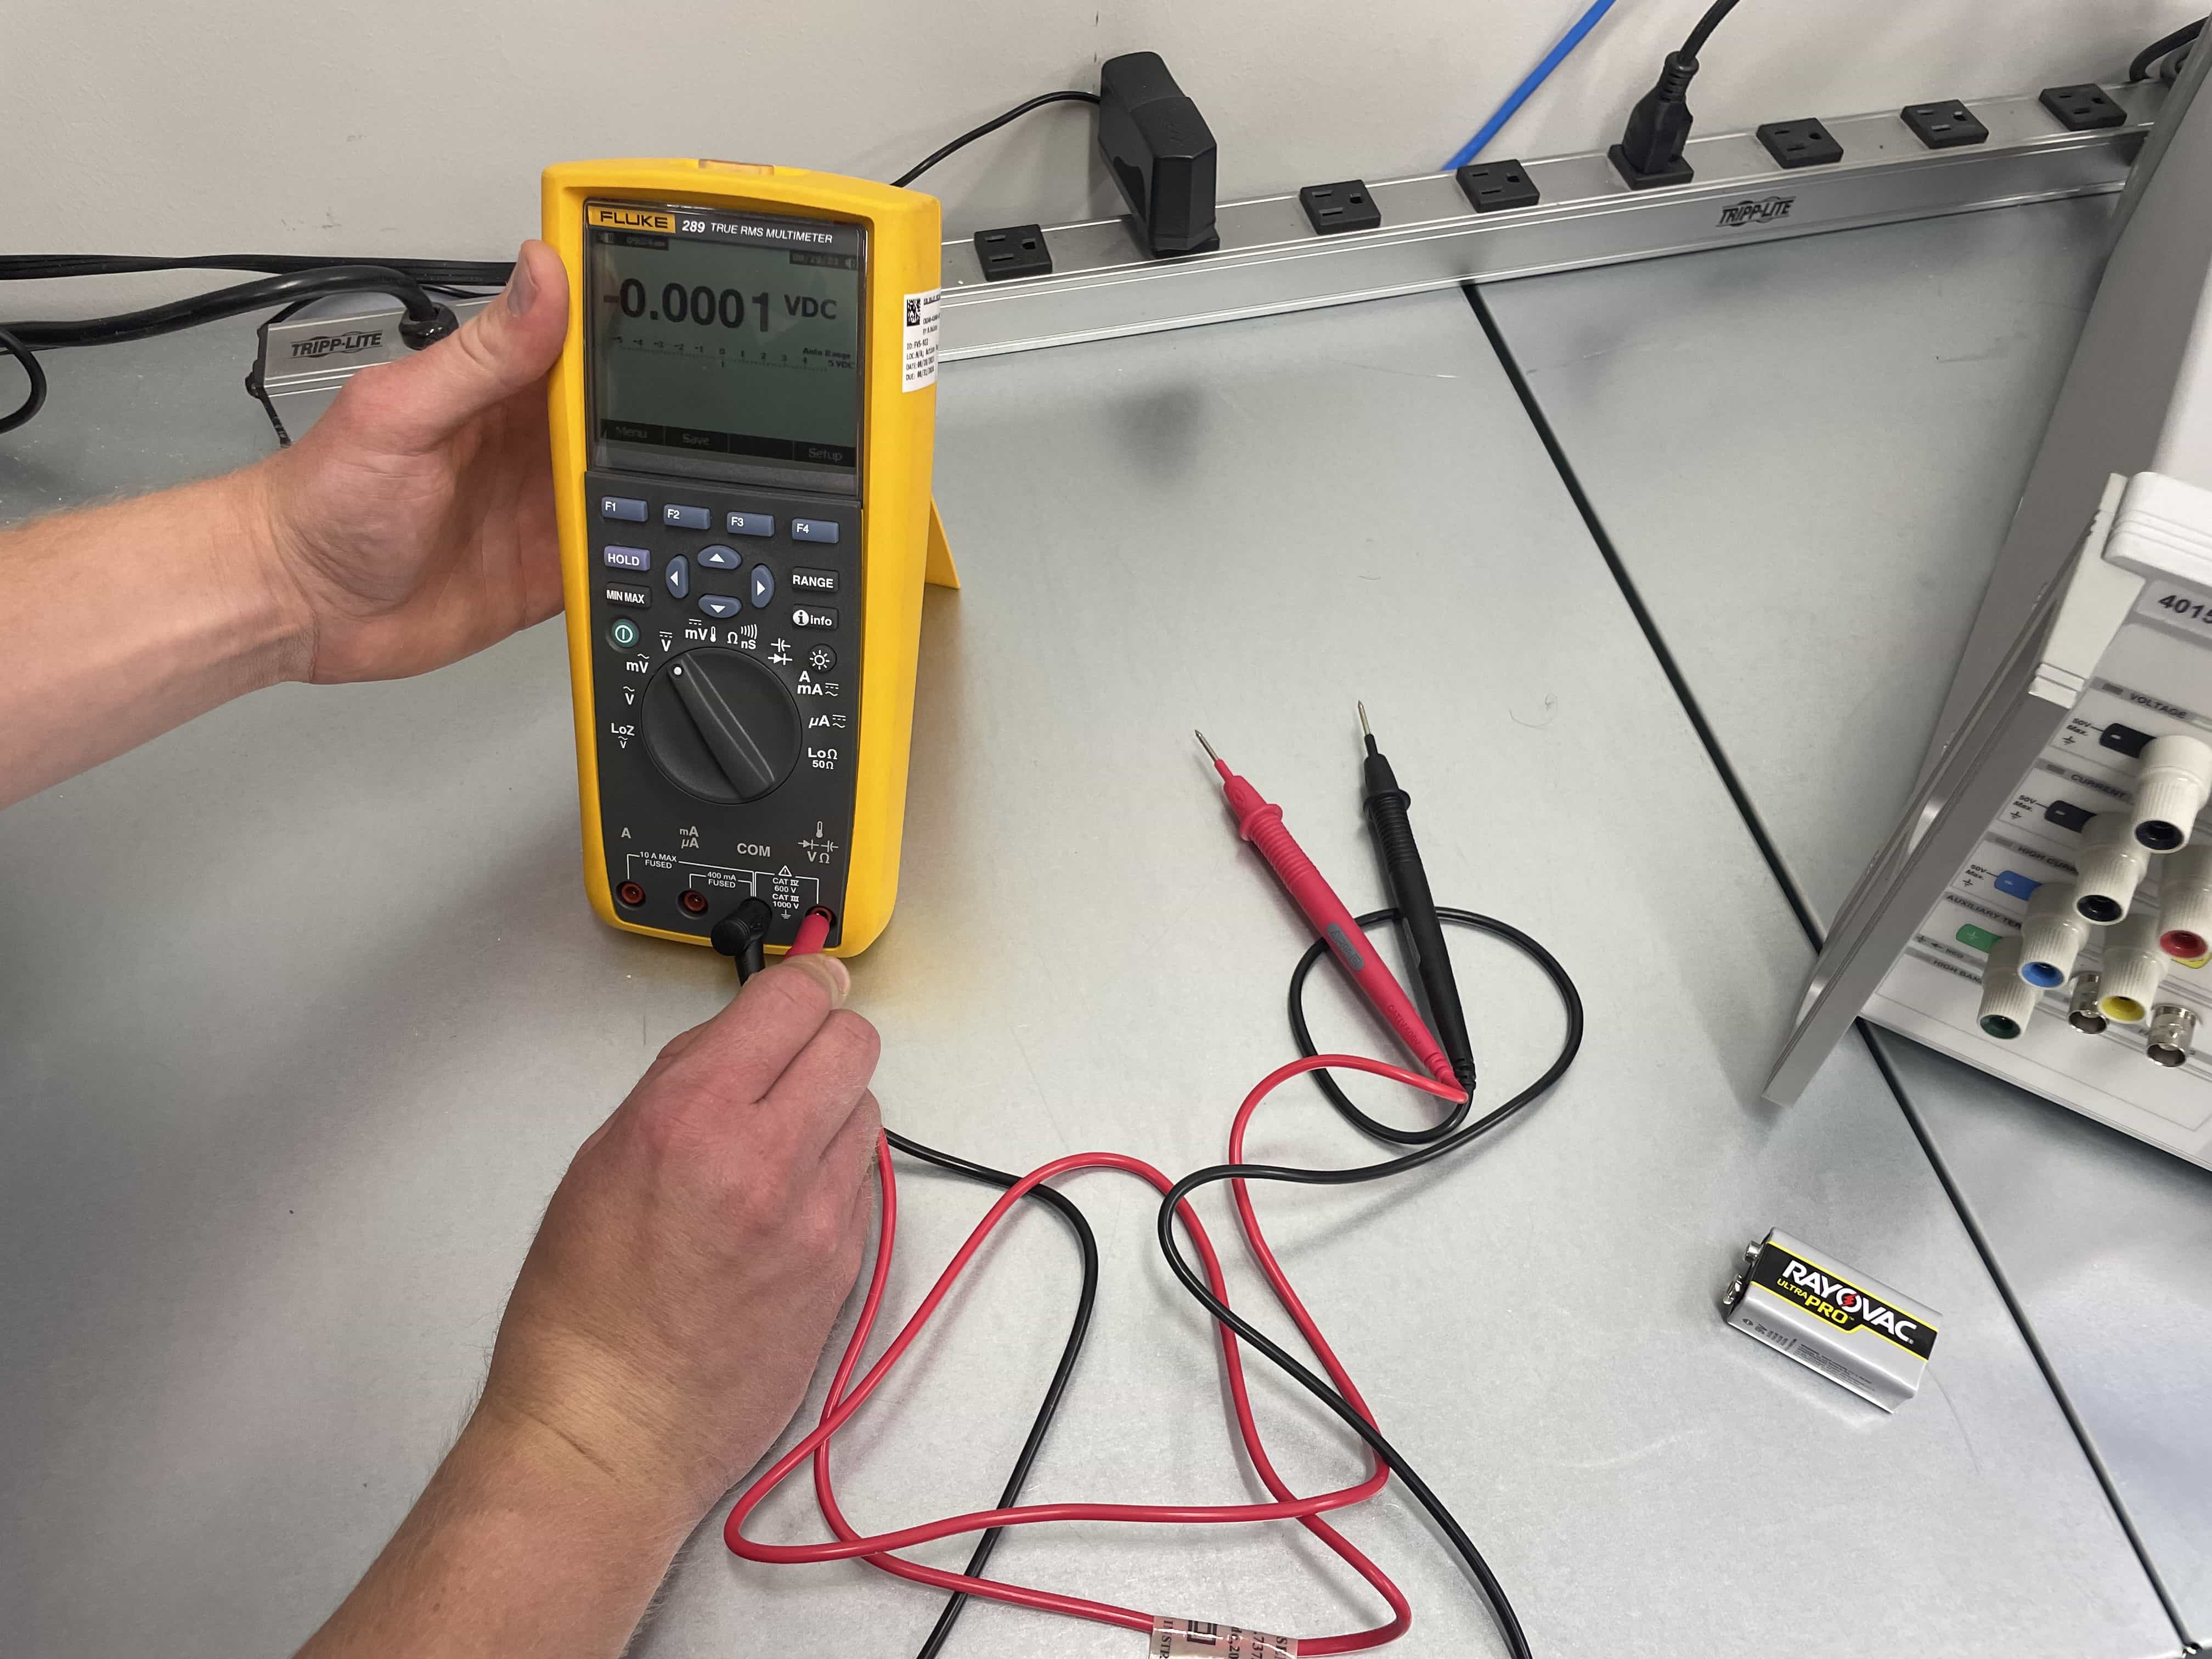 How to Use a Multimeter - Connect the Test Leads to the Multimeter